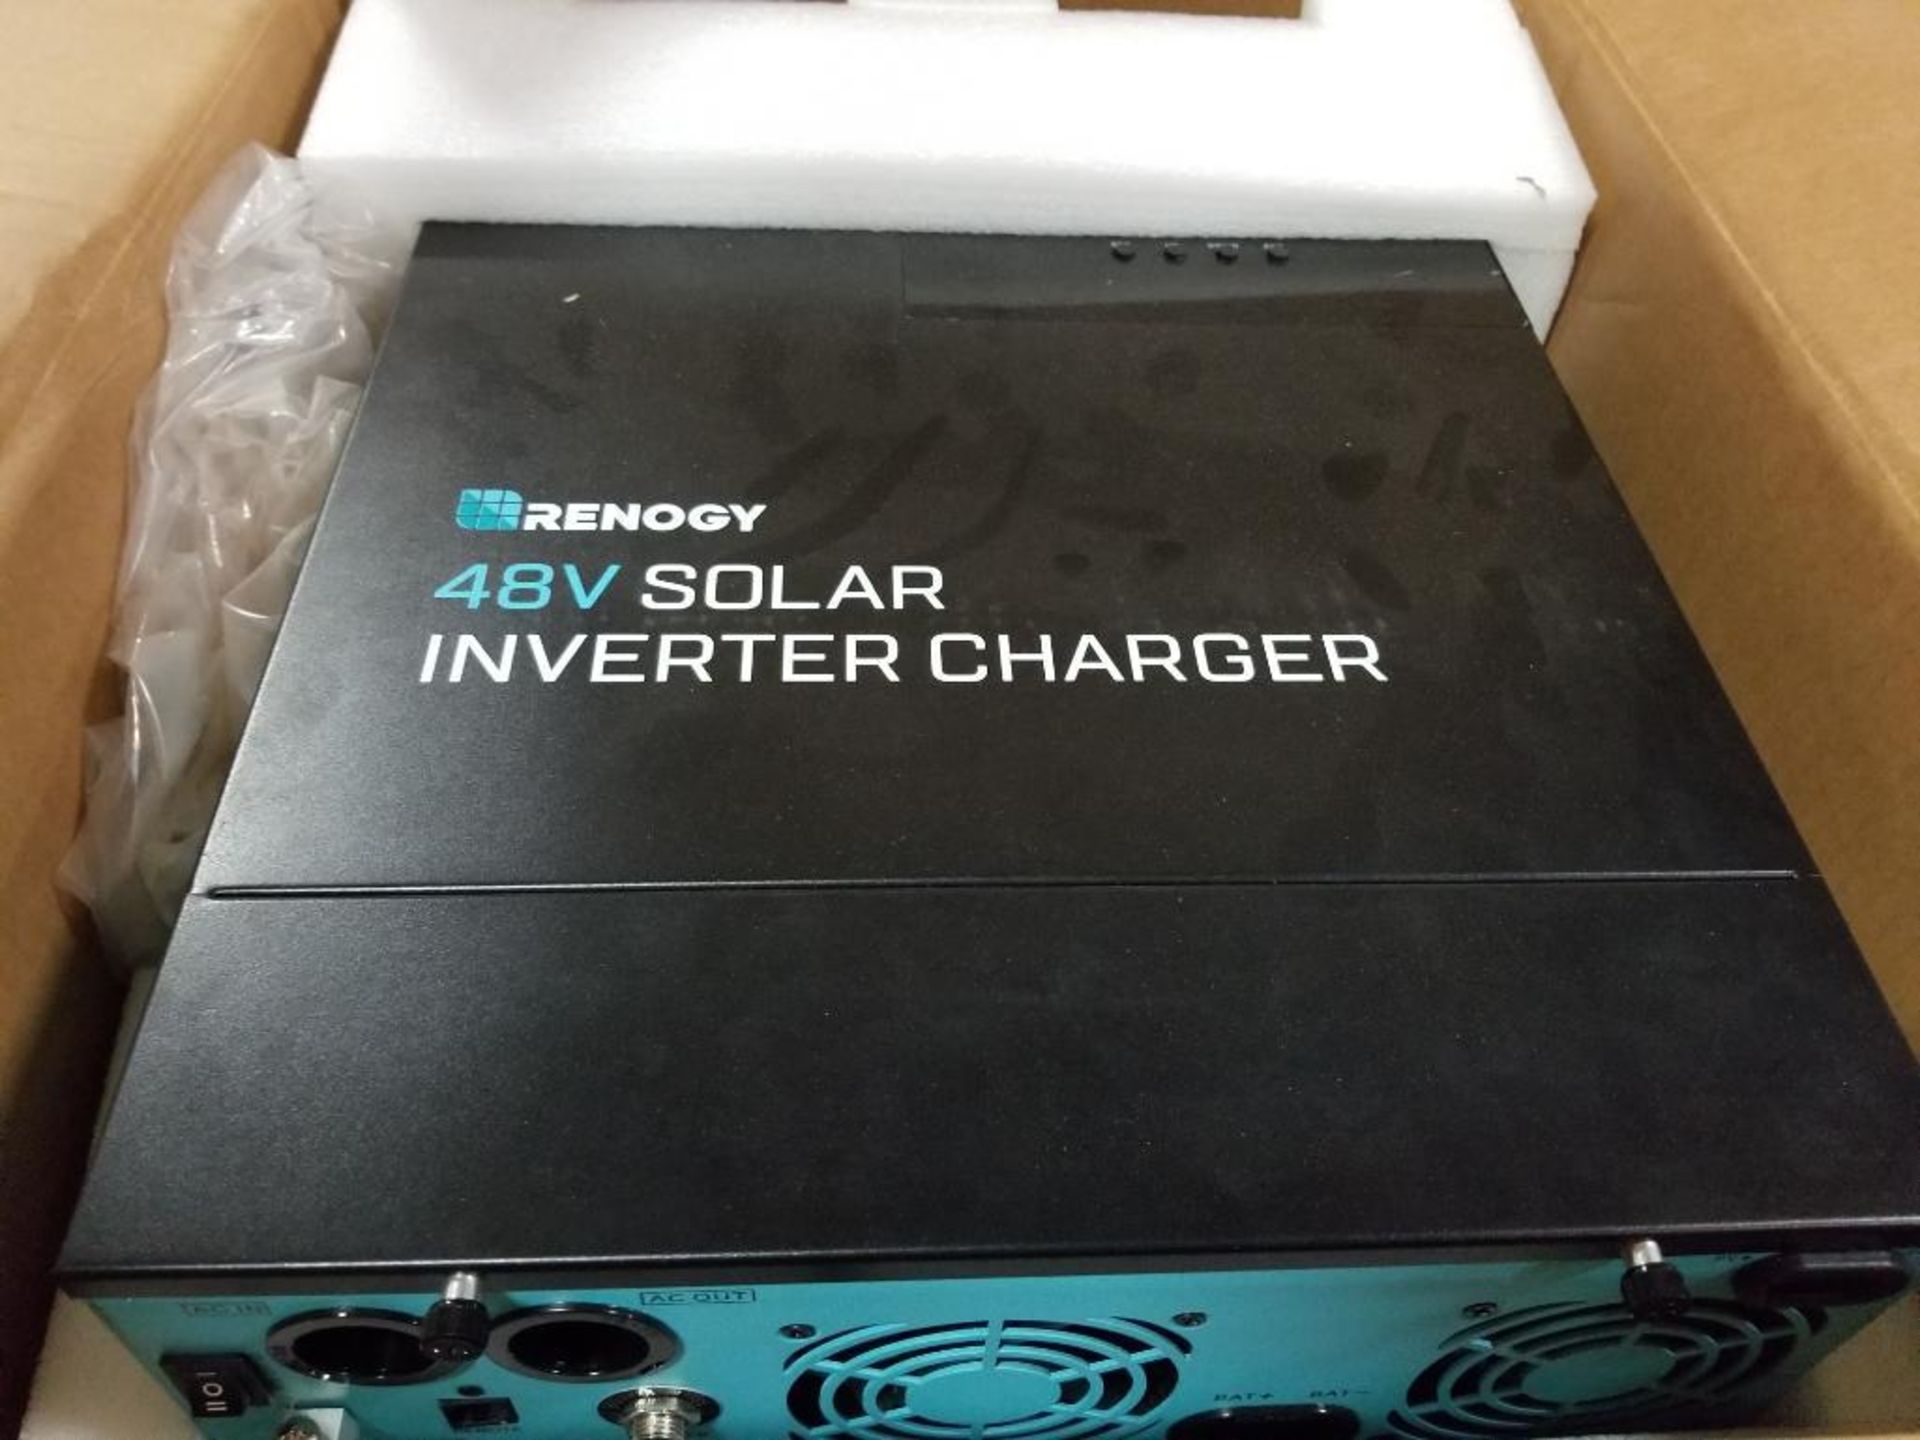 Renolgy solar inverter charger 48V 3500W. RIV4835CH1S-G2-US. - Image 5 of 8